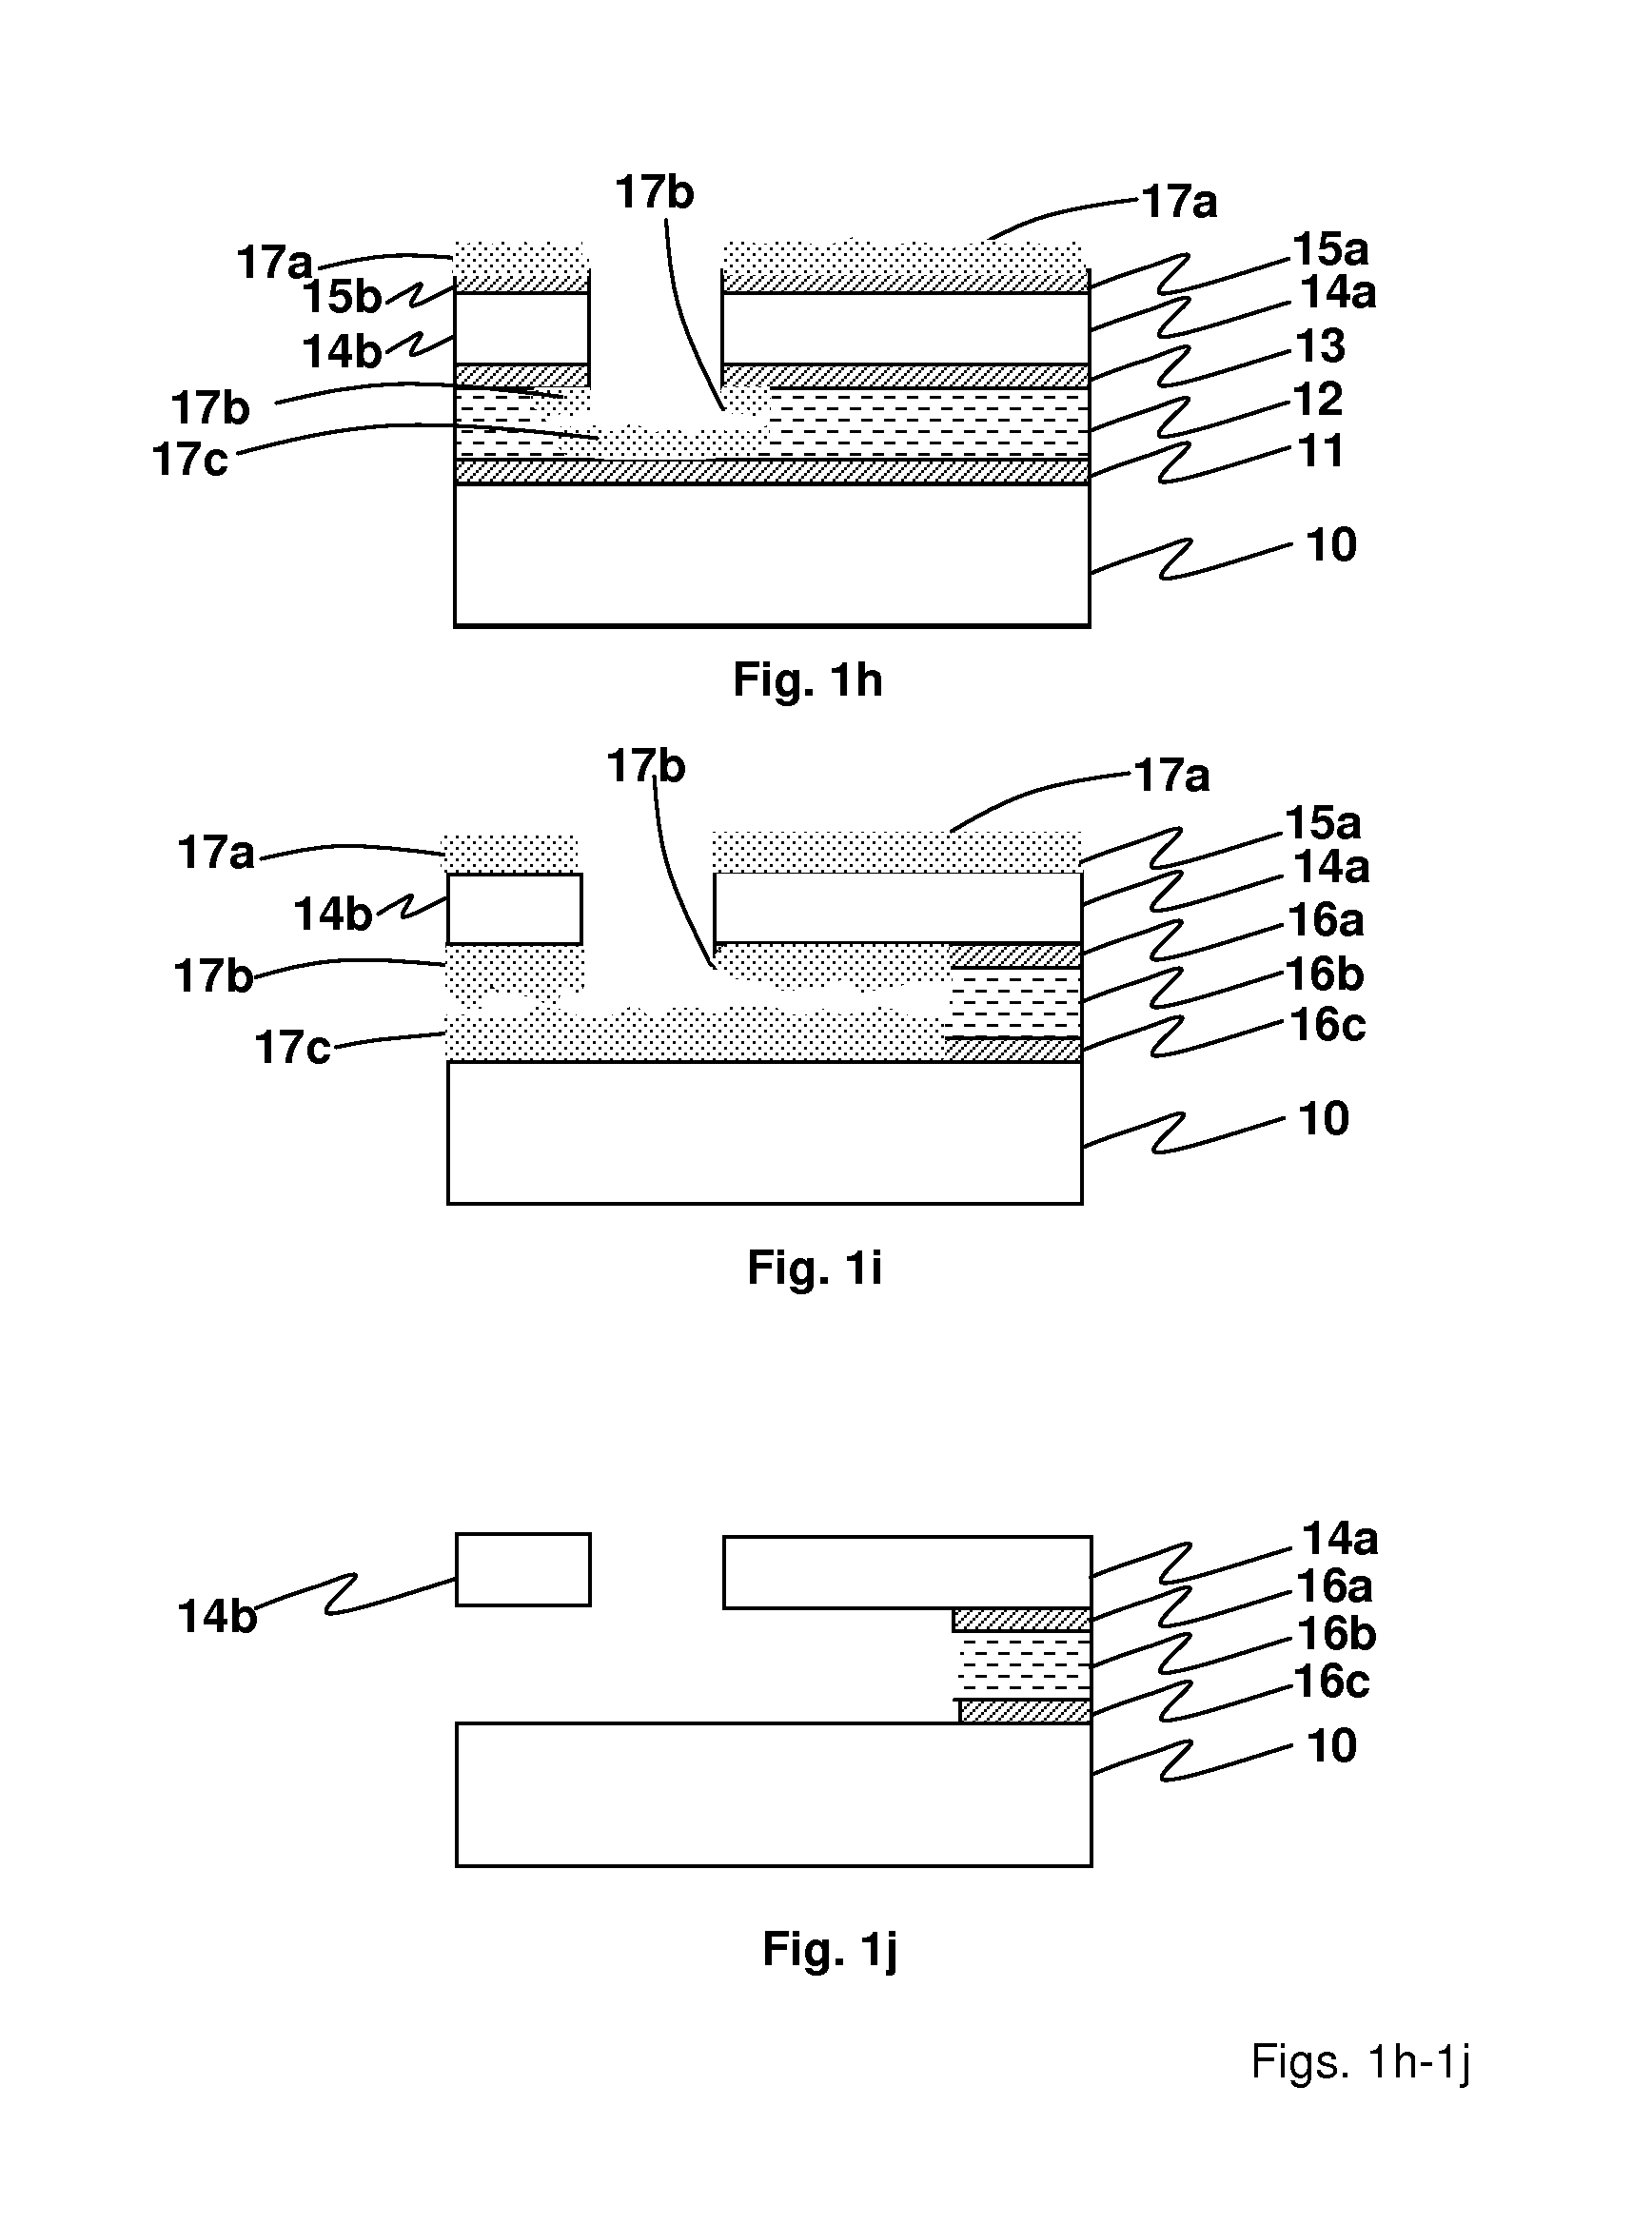 Process for manufacturing electro-mechanical systems